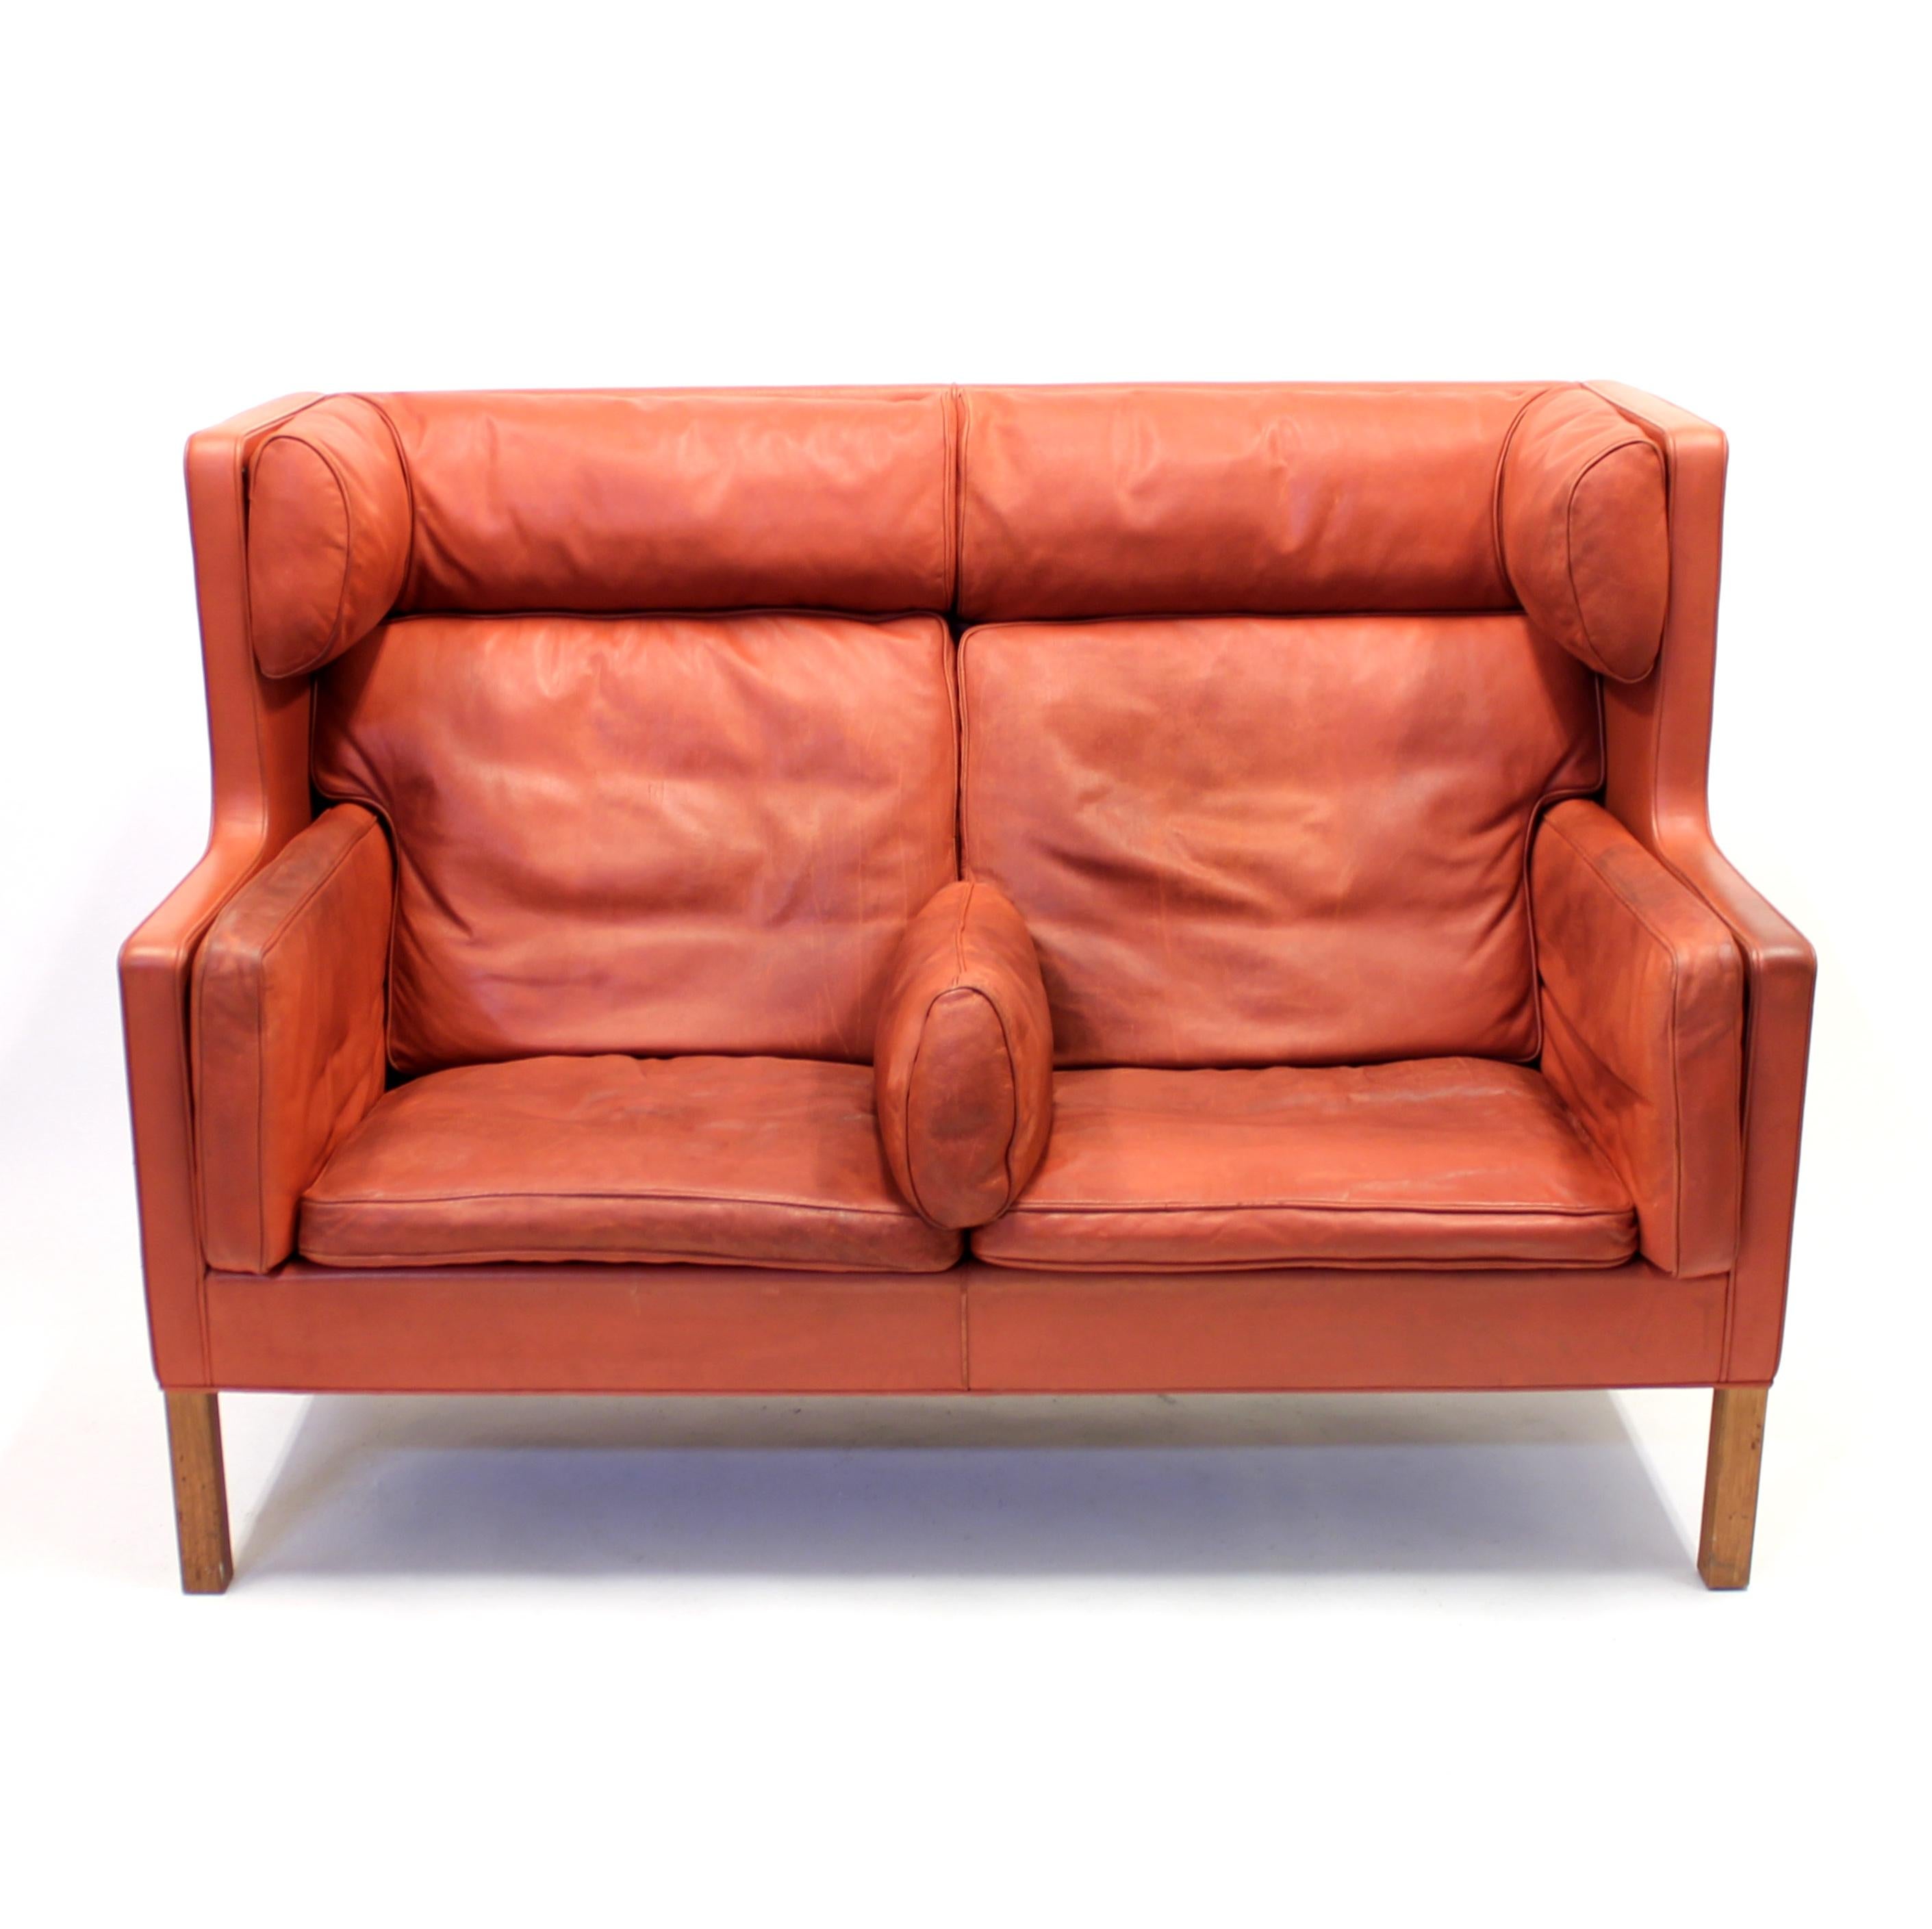 20th Century Børge Mogensen, Coupe Leather Sofa 2192, for Frederica, 1980s